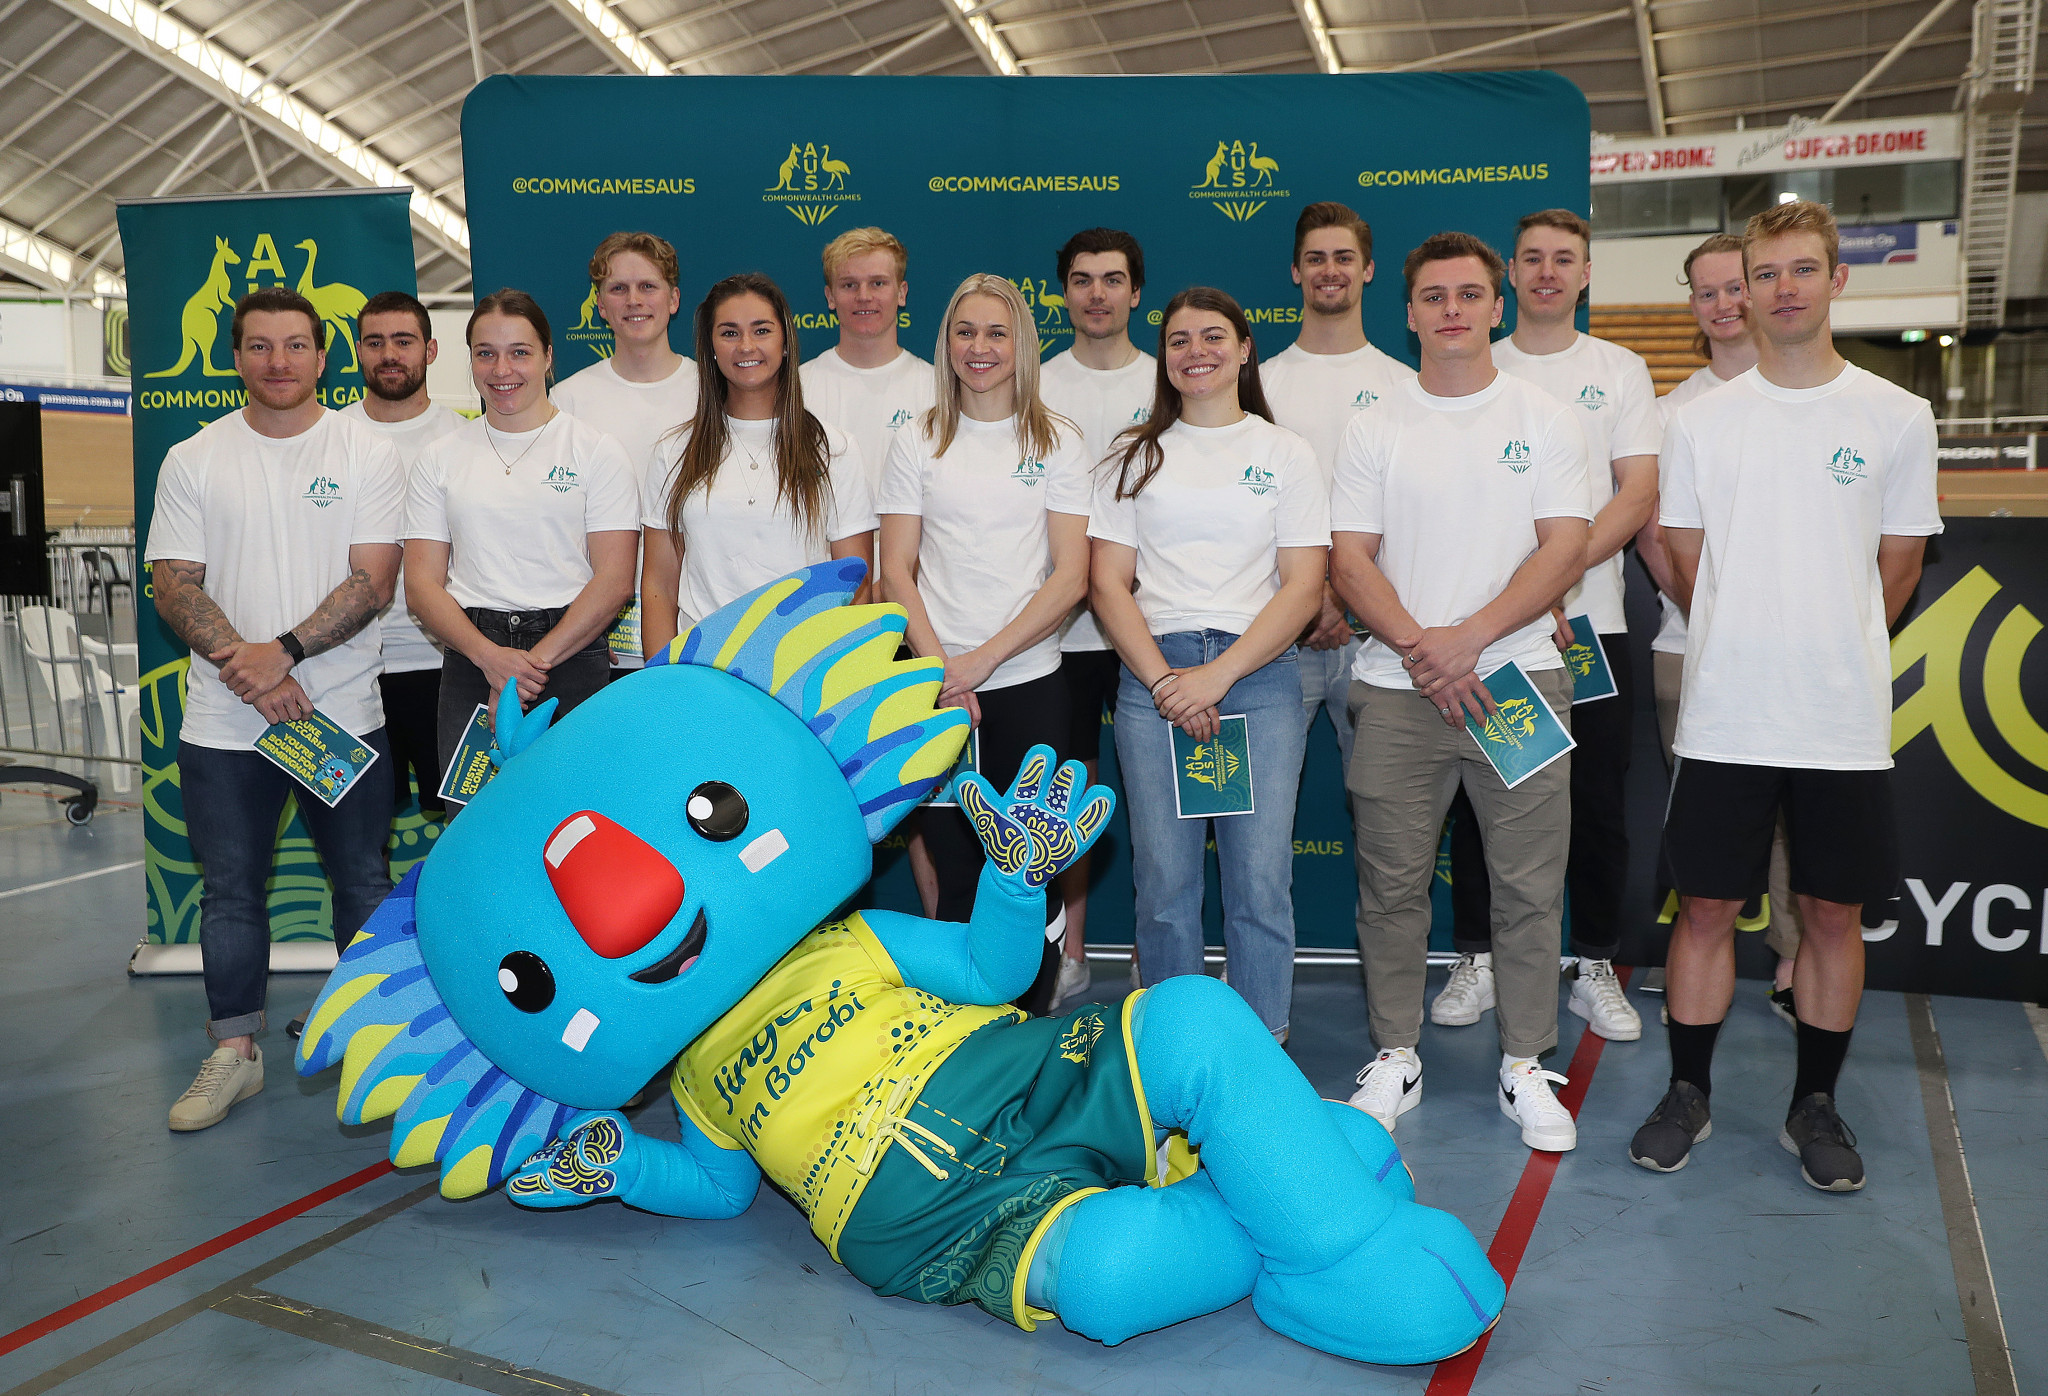 Australia will be looking to replicate their success from Gold Coast 2018 ©Commonwealth Games Australia